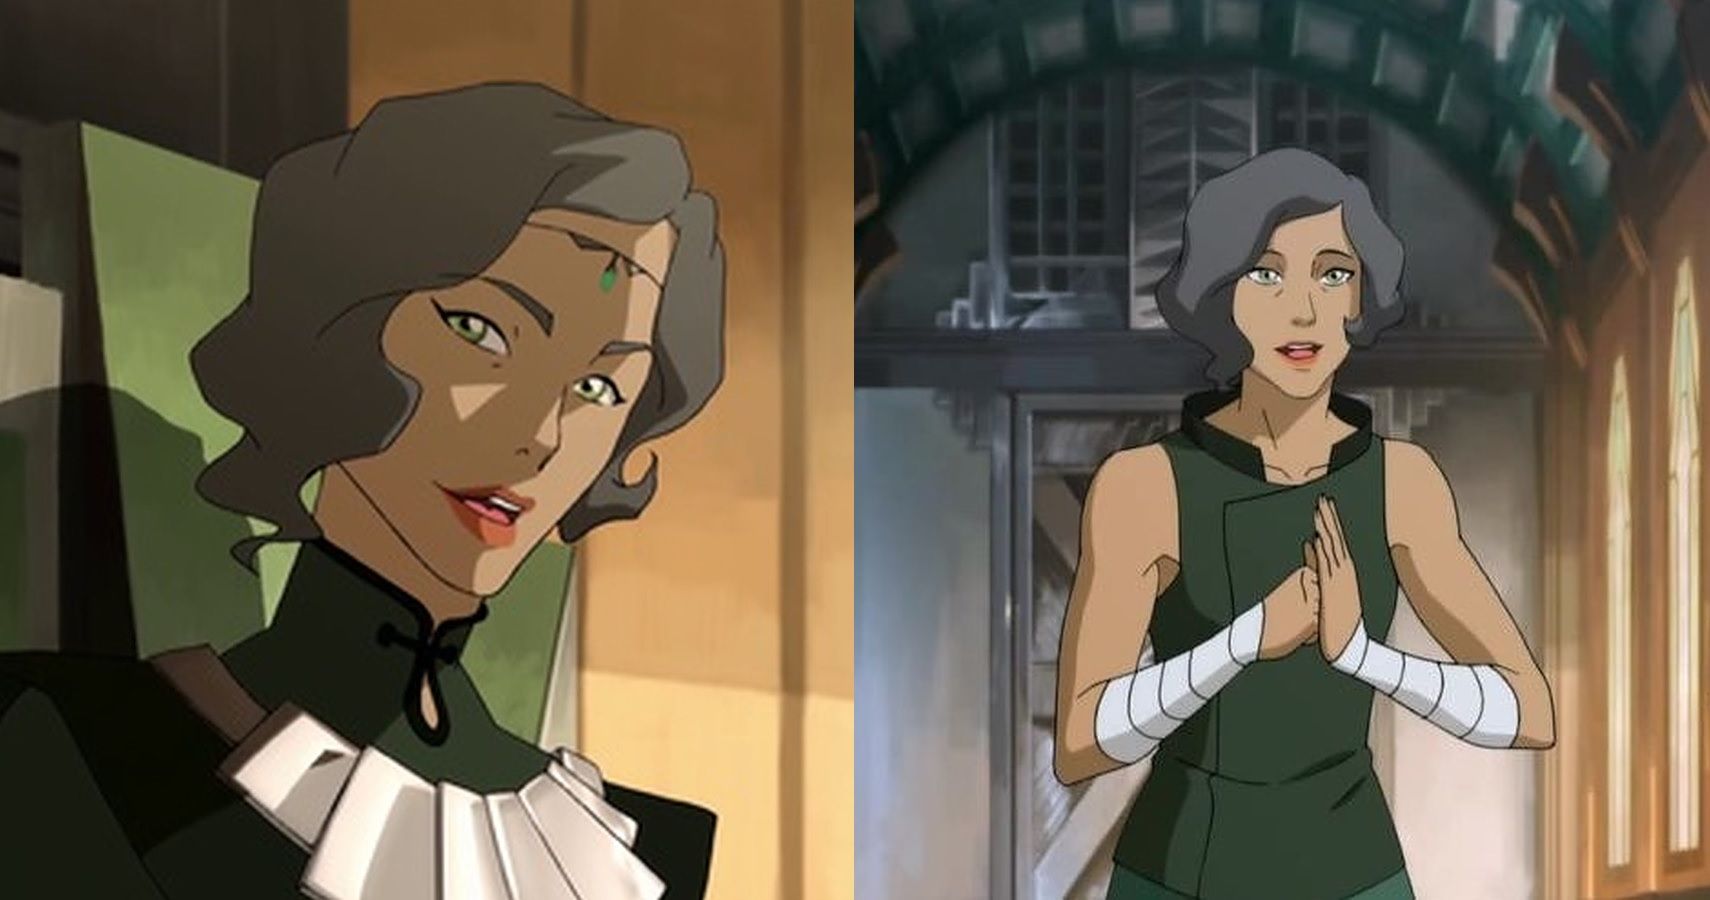 korra's most controversial storylines, ranked